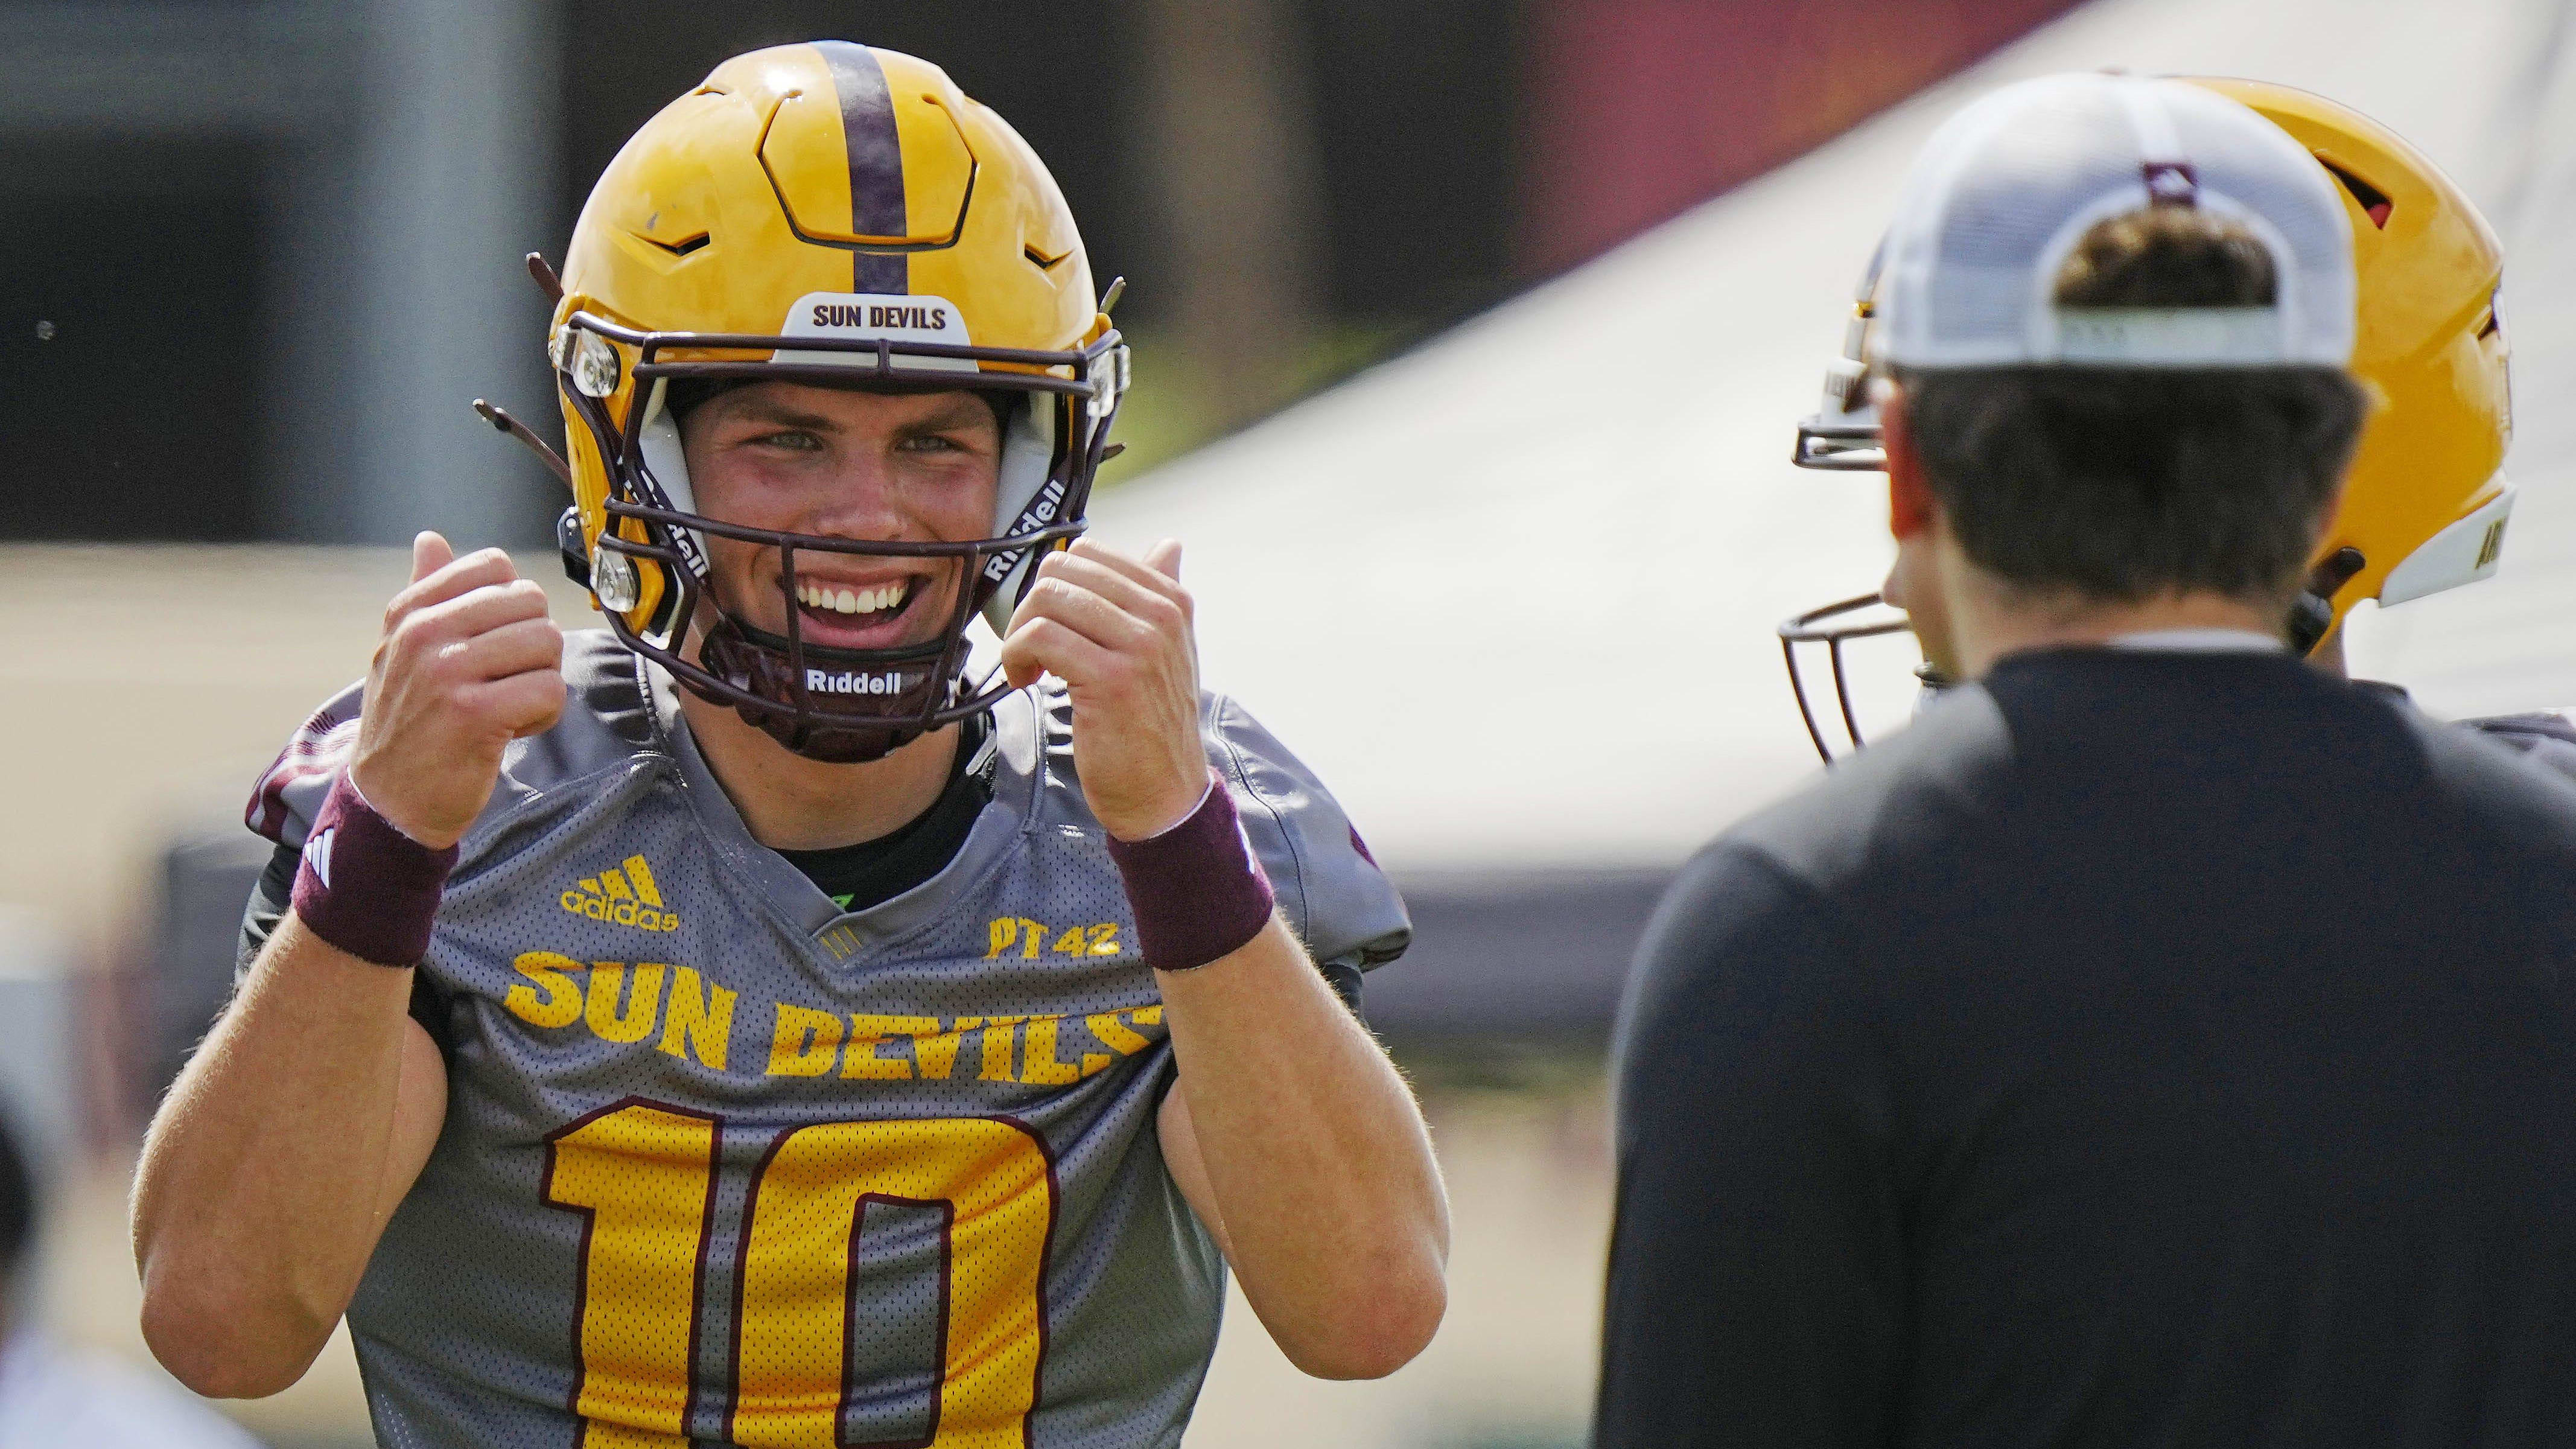 REPORT: Former Michigan State QB Expected To Start For Arizona State